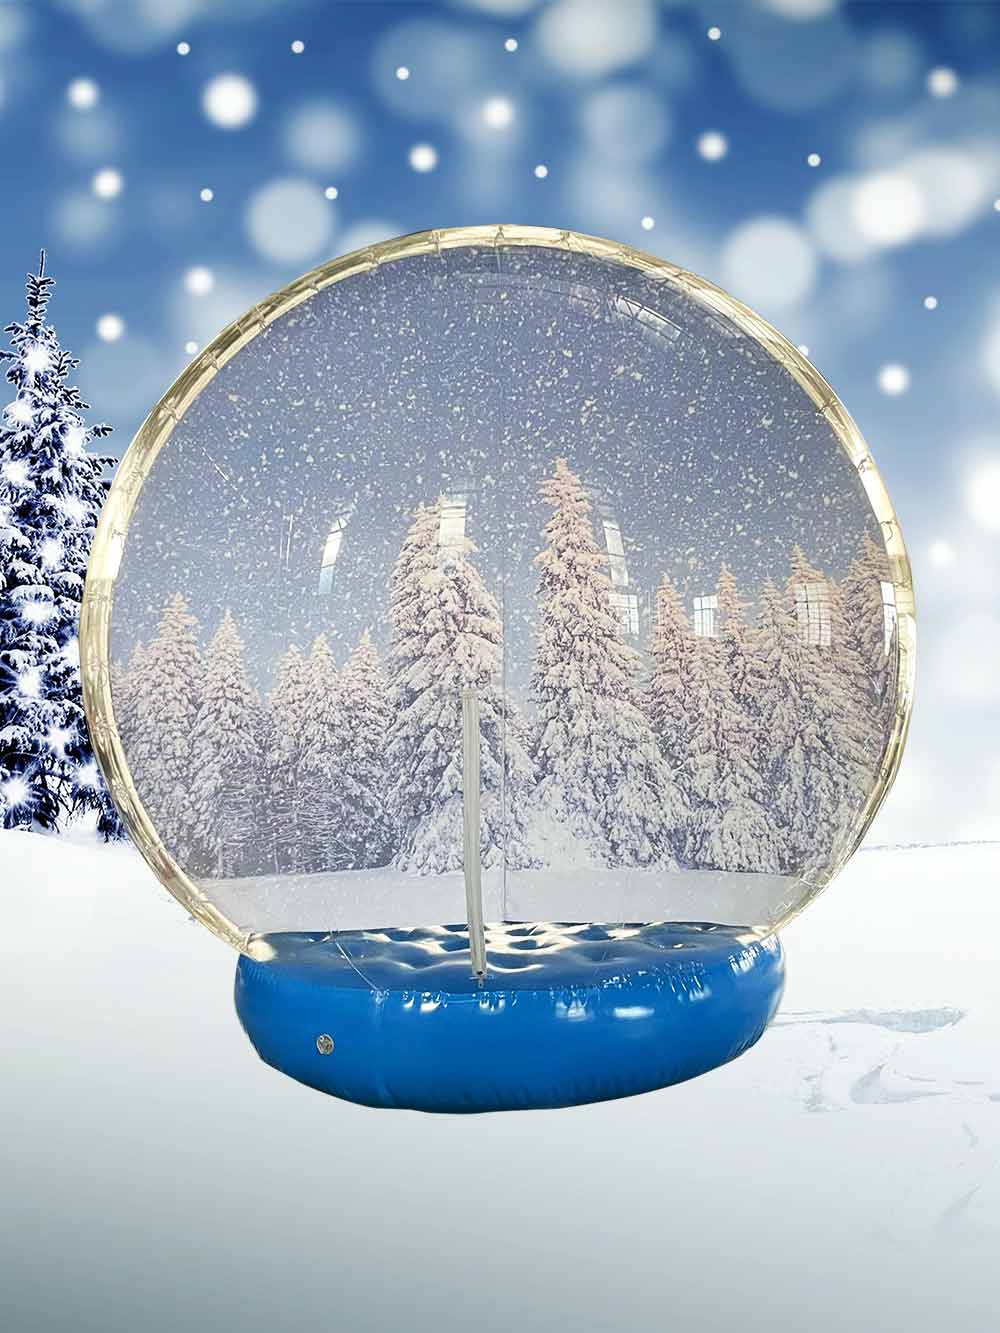 Best Giant Inflatable Snow Globe with Artificial Snowflakes